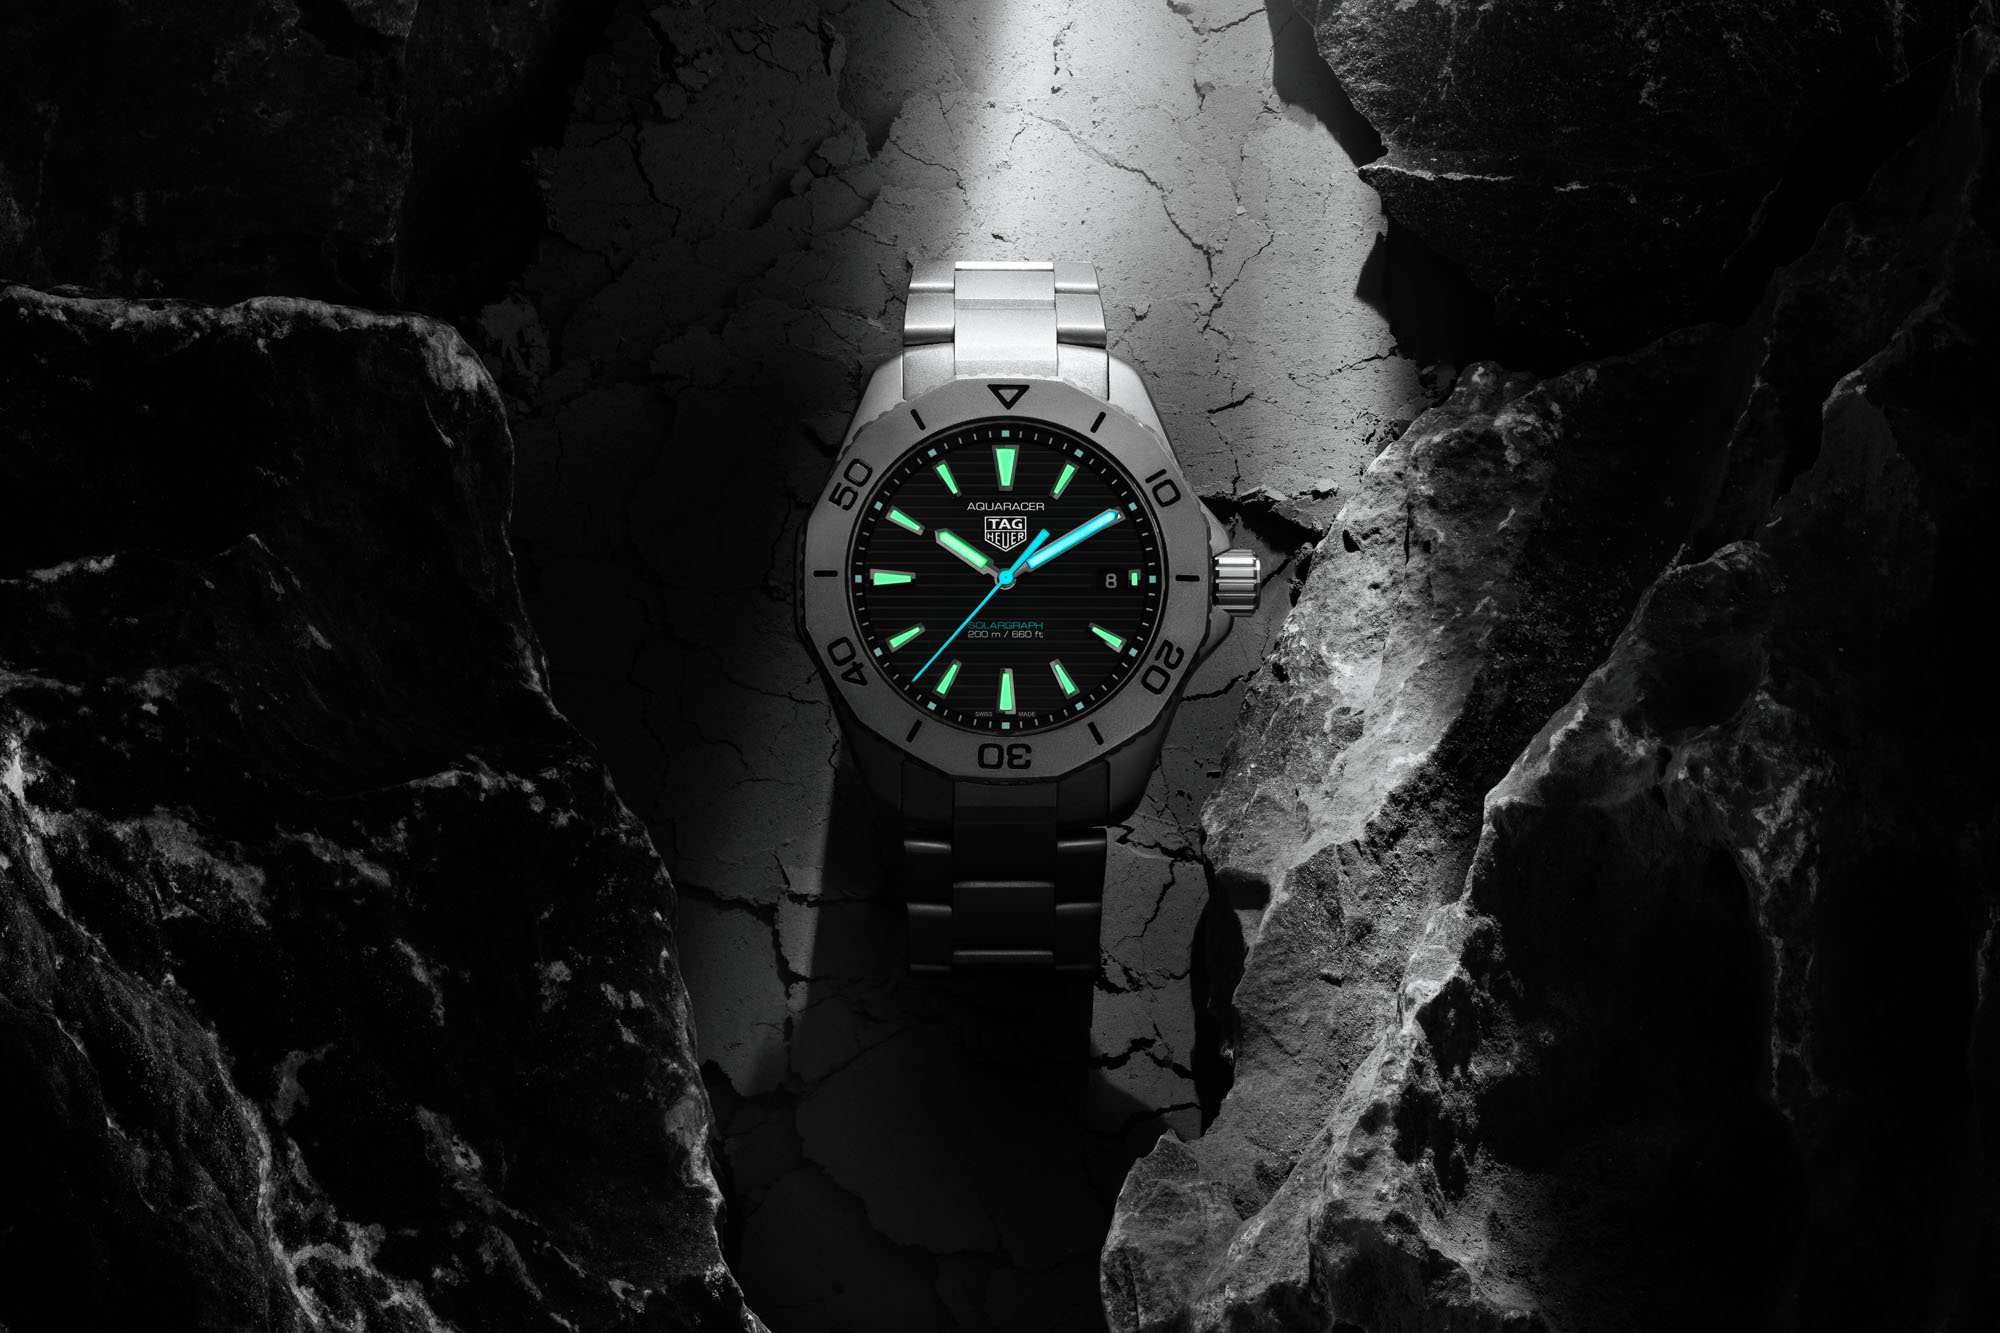 The Best Swiss Tag Heuer Aquaracer Professional 200 Solargraph Watch You Can Find